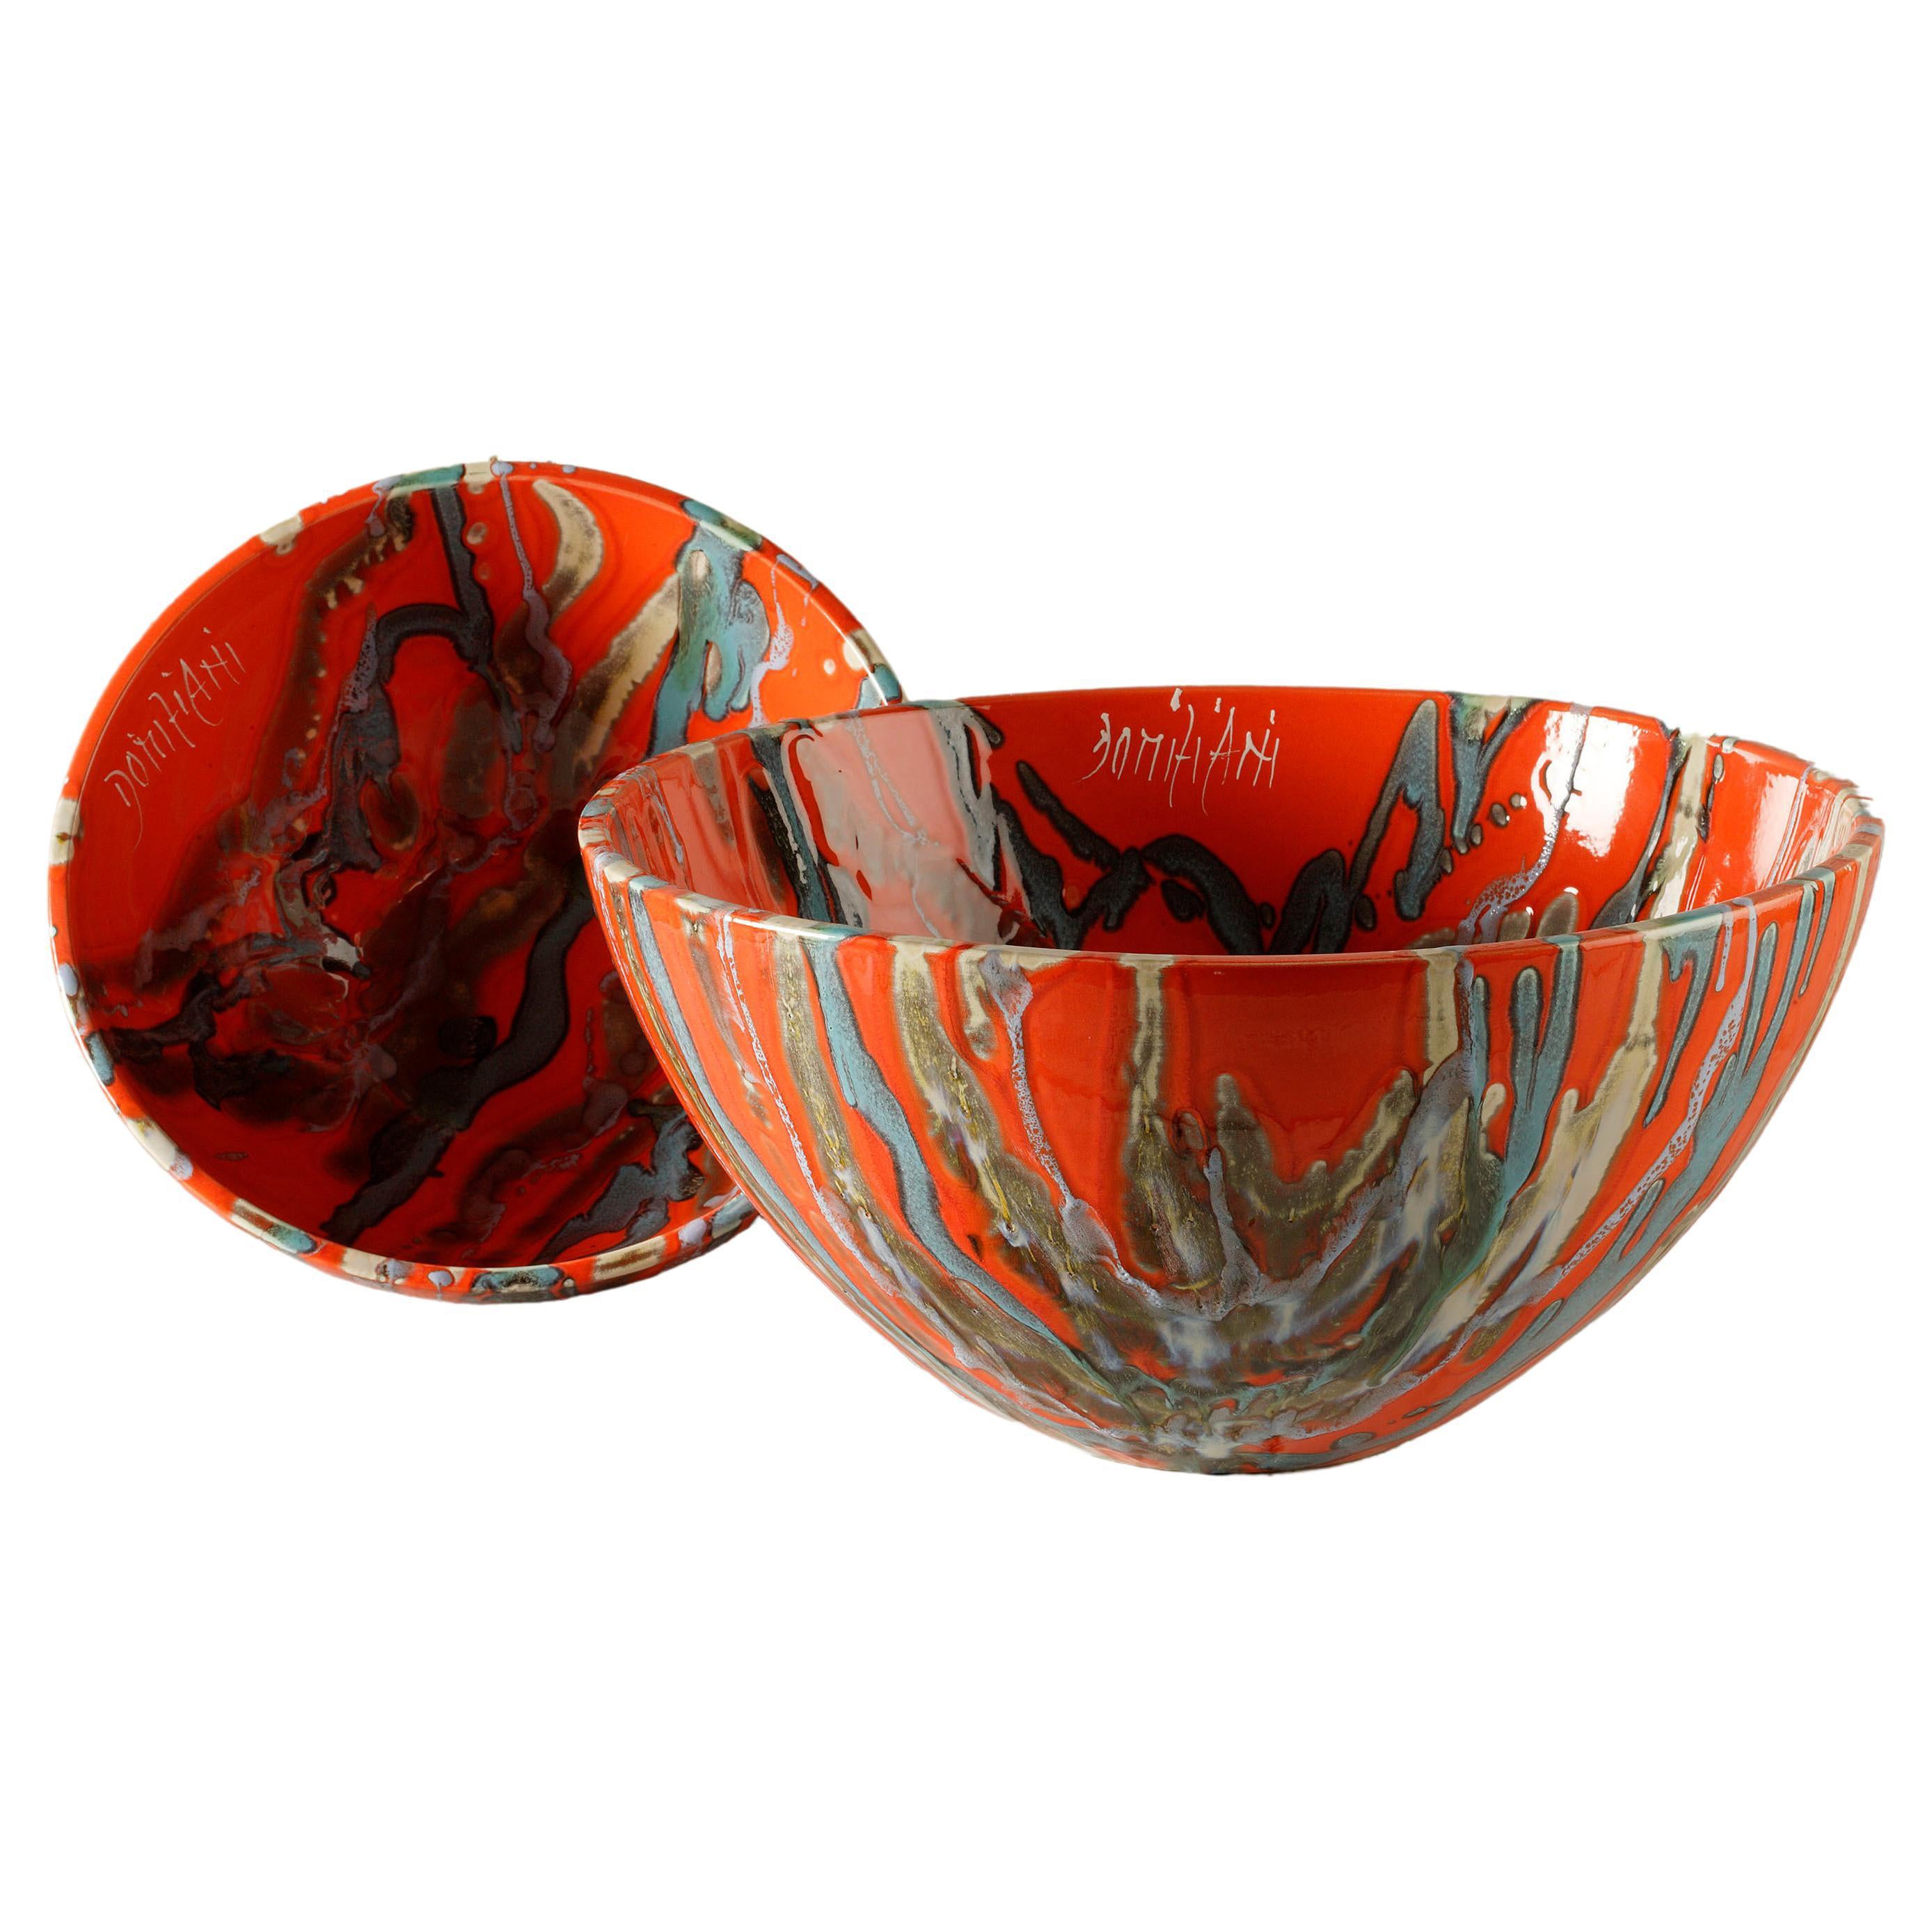 Ceramic Bowl, Handmade in Italy 2021, Choose Your Pattern For Sale